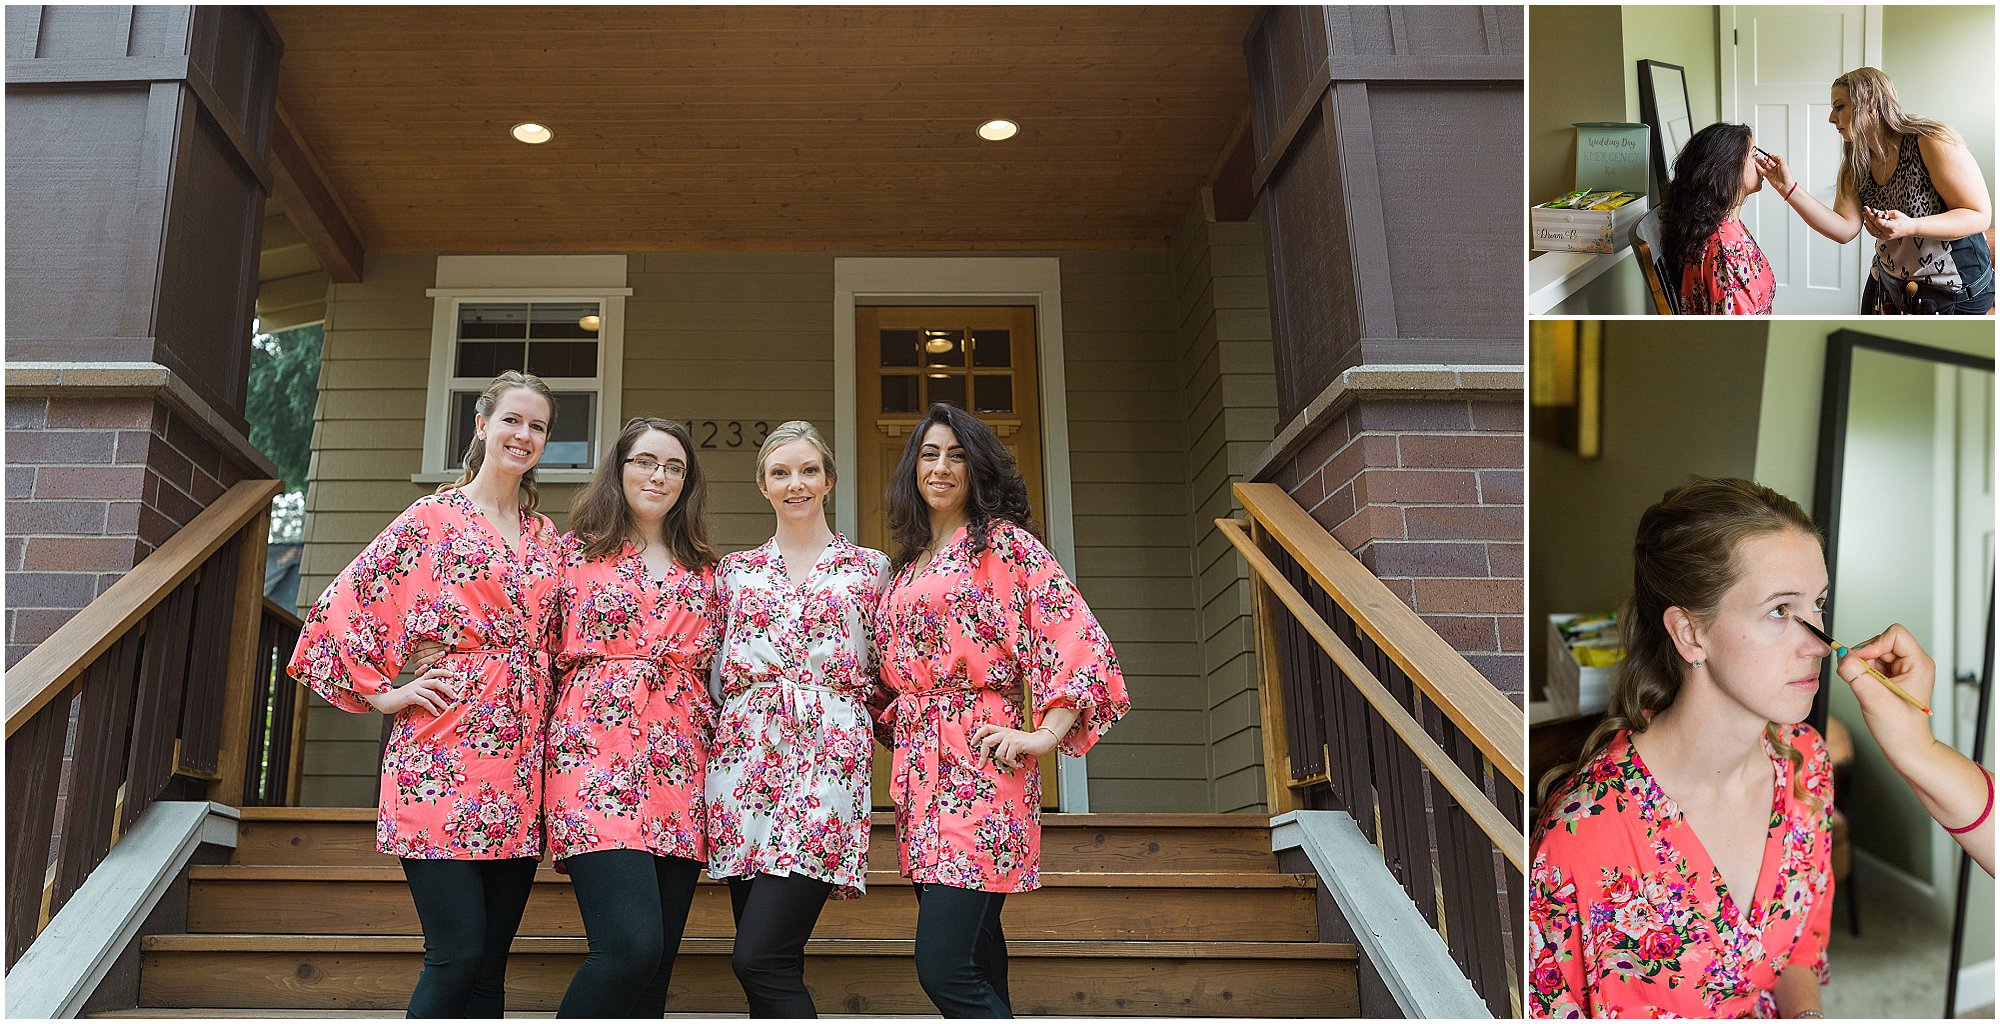 Deschutes brewery wedding bridesmaids in their getting ready robes. | Erica Swantek Photography